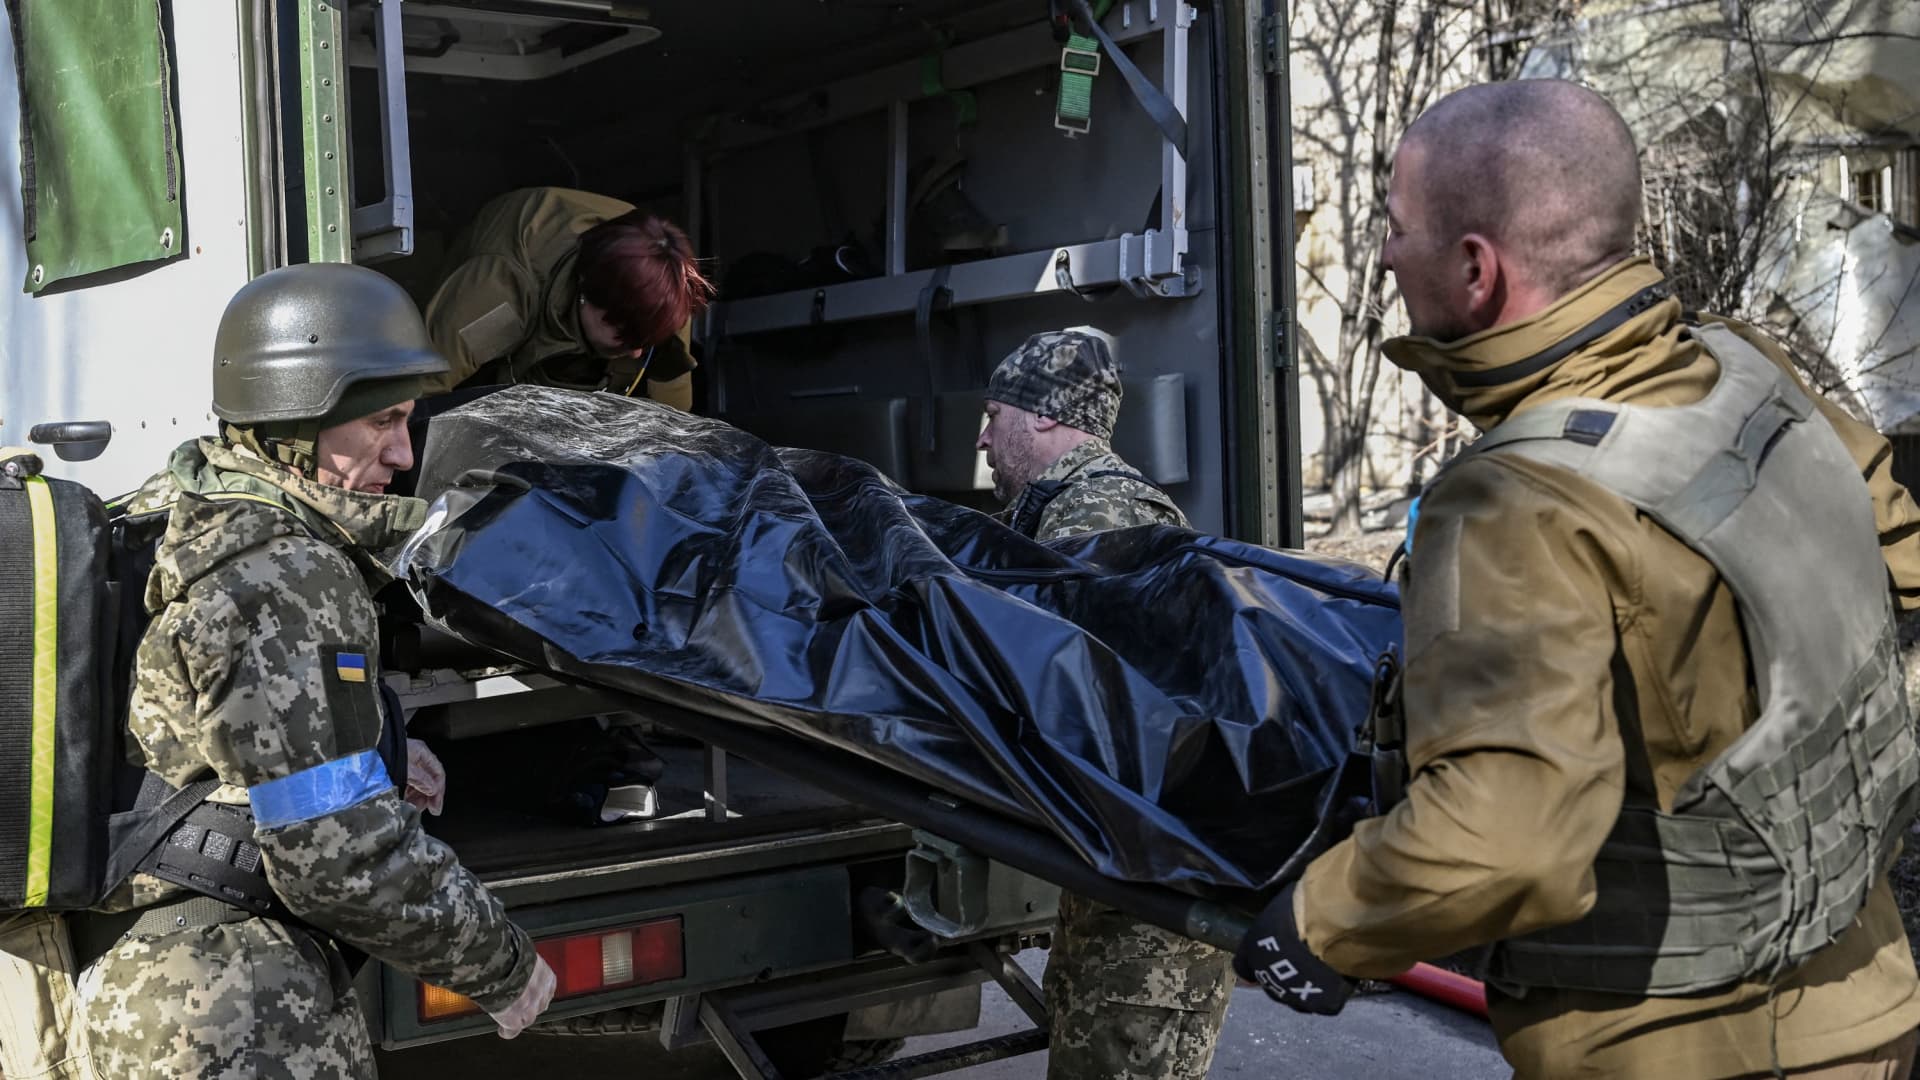 Military emergency service members remove the body of a dead Ukrainian serviceman in the area of a research institute, part of Ukraine's National Academy of Science, after a strike, in northwestern Kyiv, on March 22, 2022.